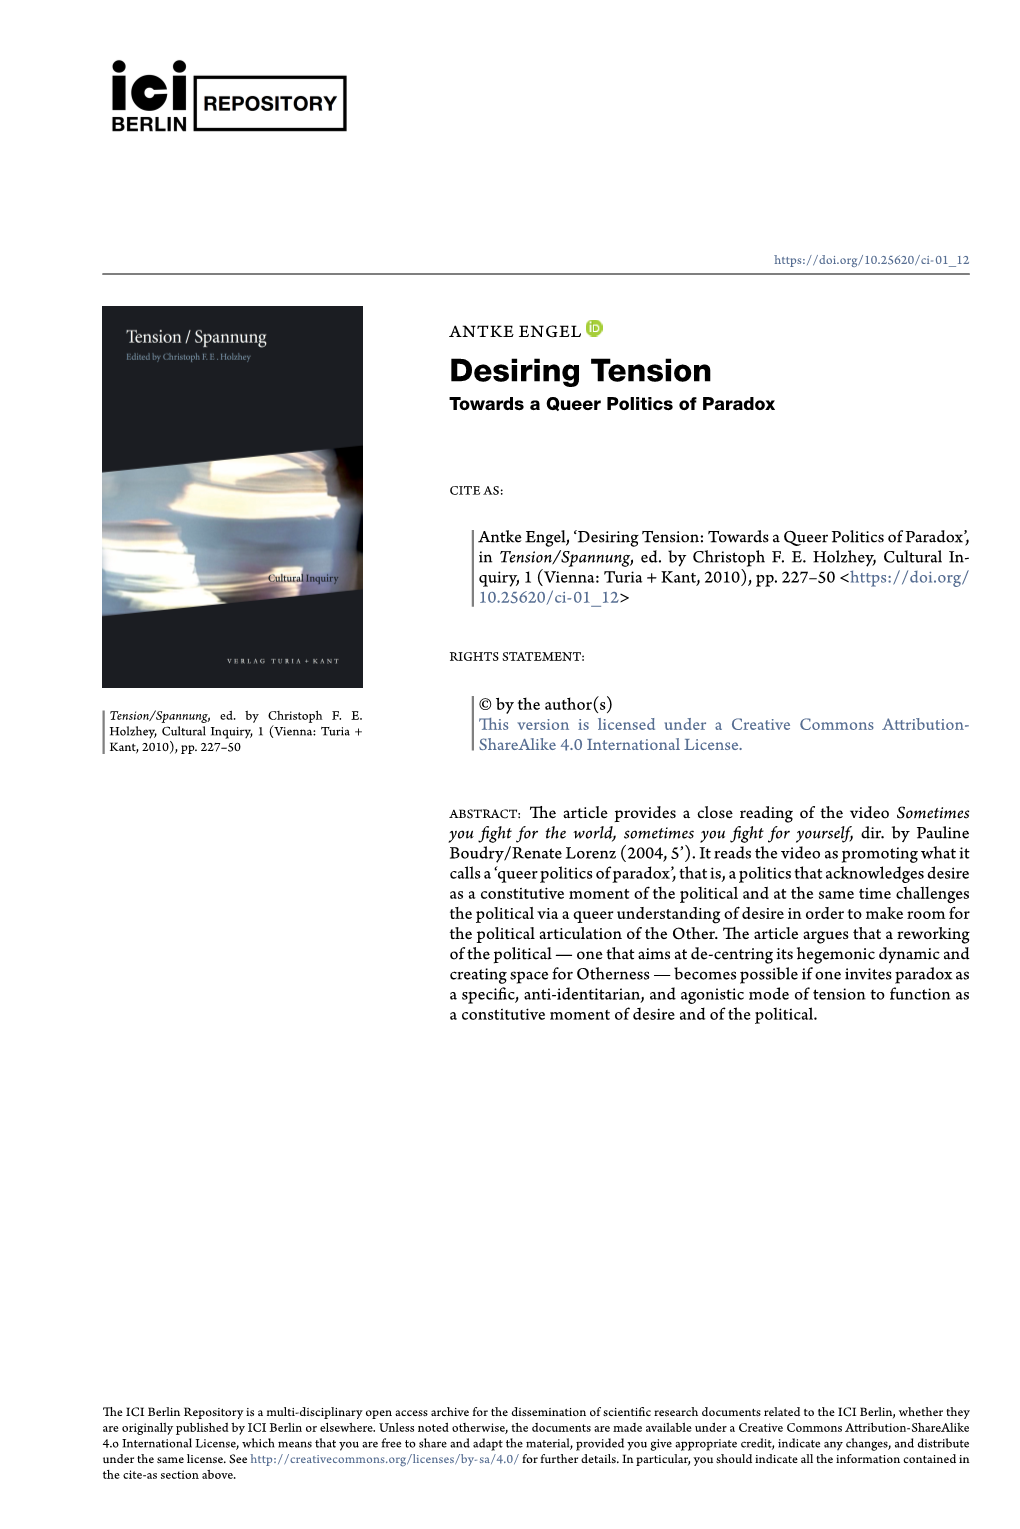 Desiring Tension: Towards a Queer Politics of Paradox’, in Tension/Spannung, Ed